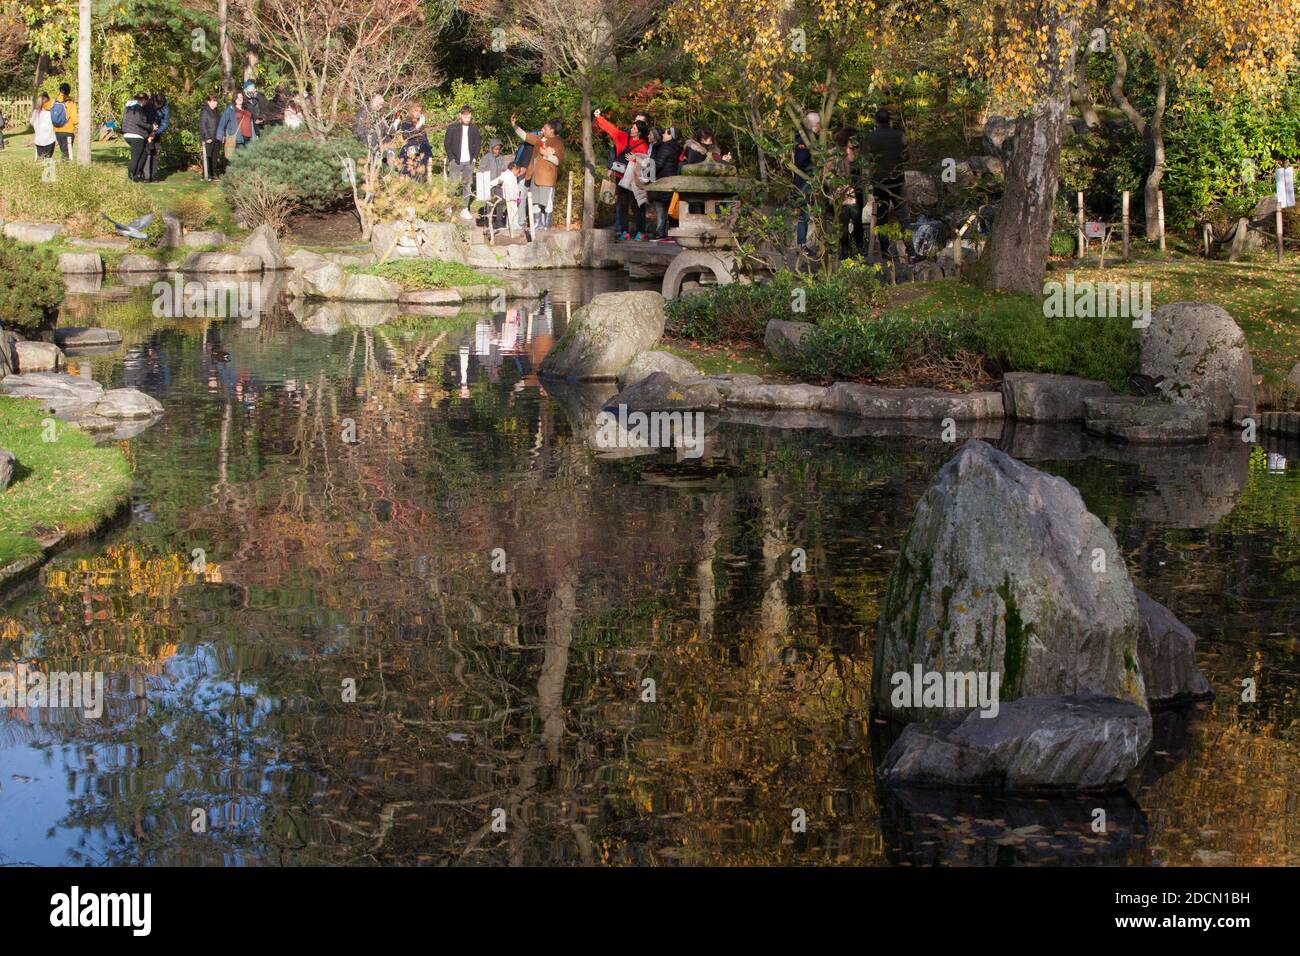 UK Weather, London, 22 November 2020: On a sunny Sunday in London people flock to Holland Park, where queues formed in the Kyoto Garden and visitors photographed squirrels and peacocks.Very few people wore face masks but most made an attempt at social distancing. Announcements are planned tomorrow (Monday) about a new tier system of covid restrictions to be implemented once the current lockdown finishes on 2 December. Anna Watson/Alamy Live News Stock Photo